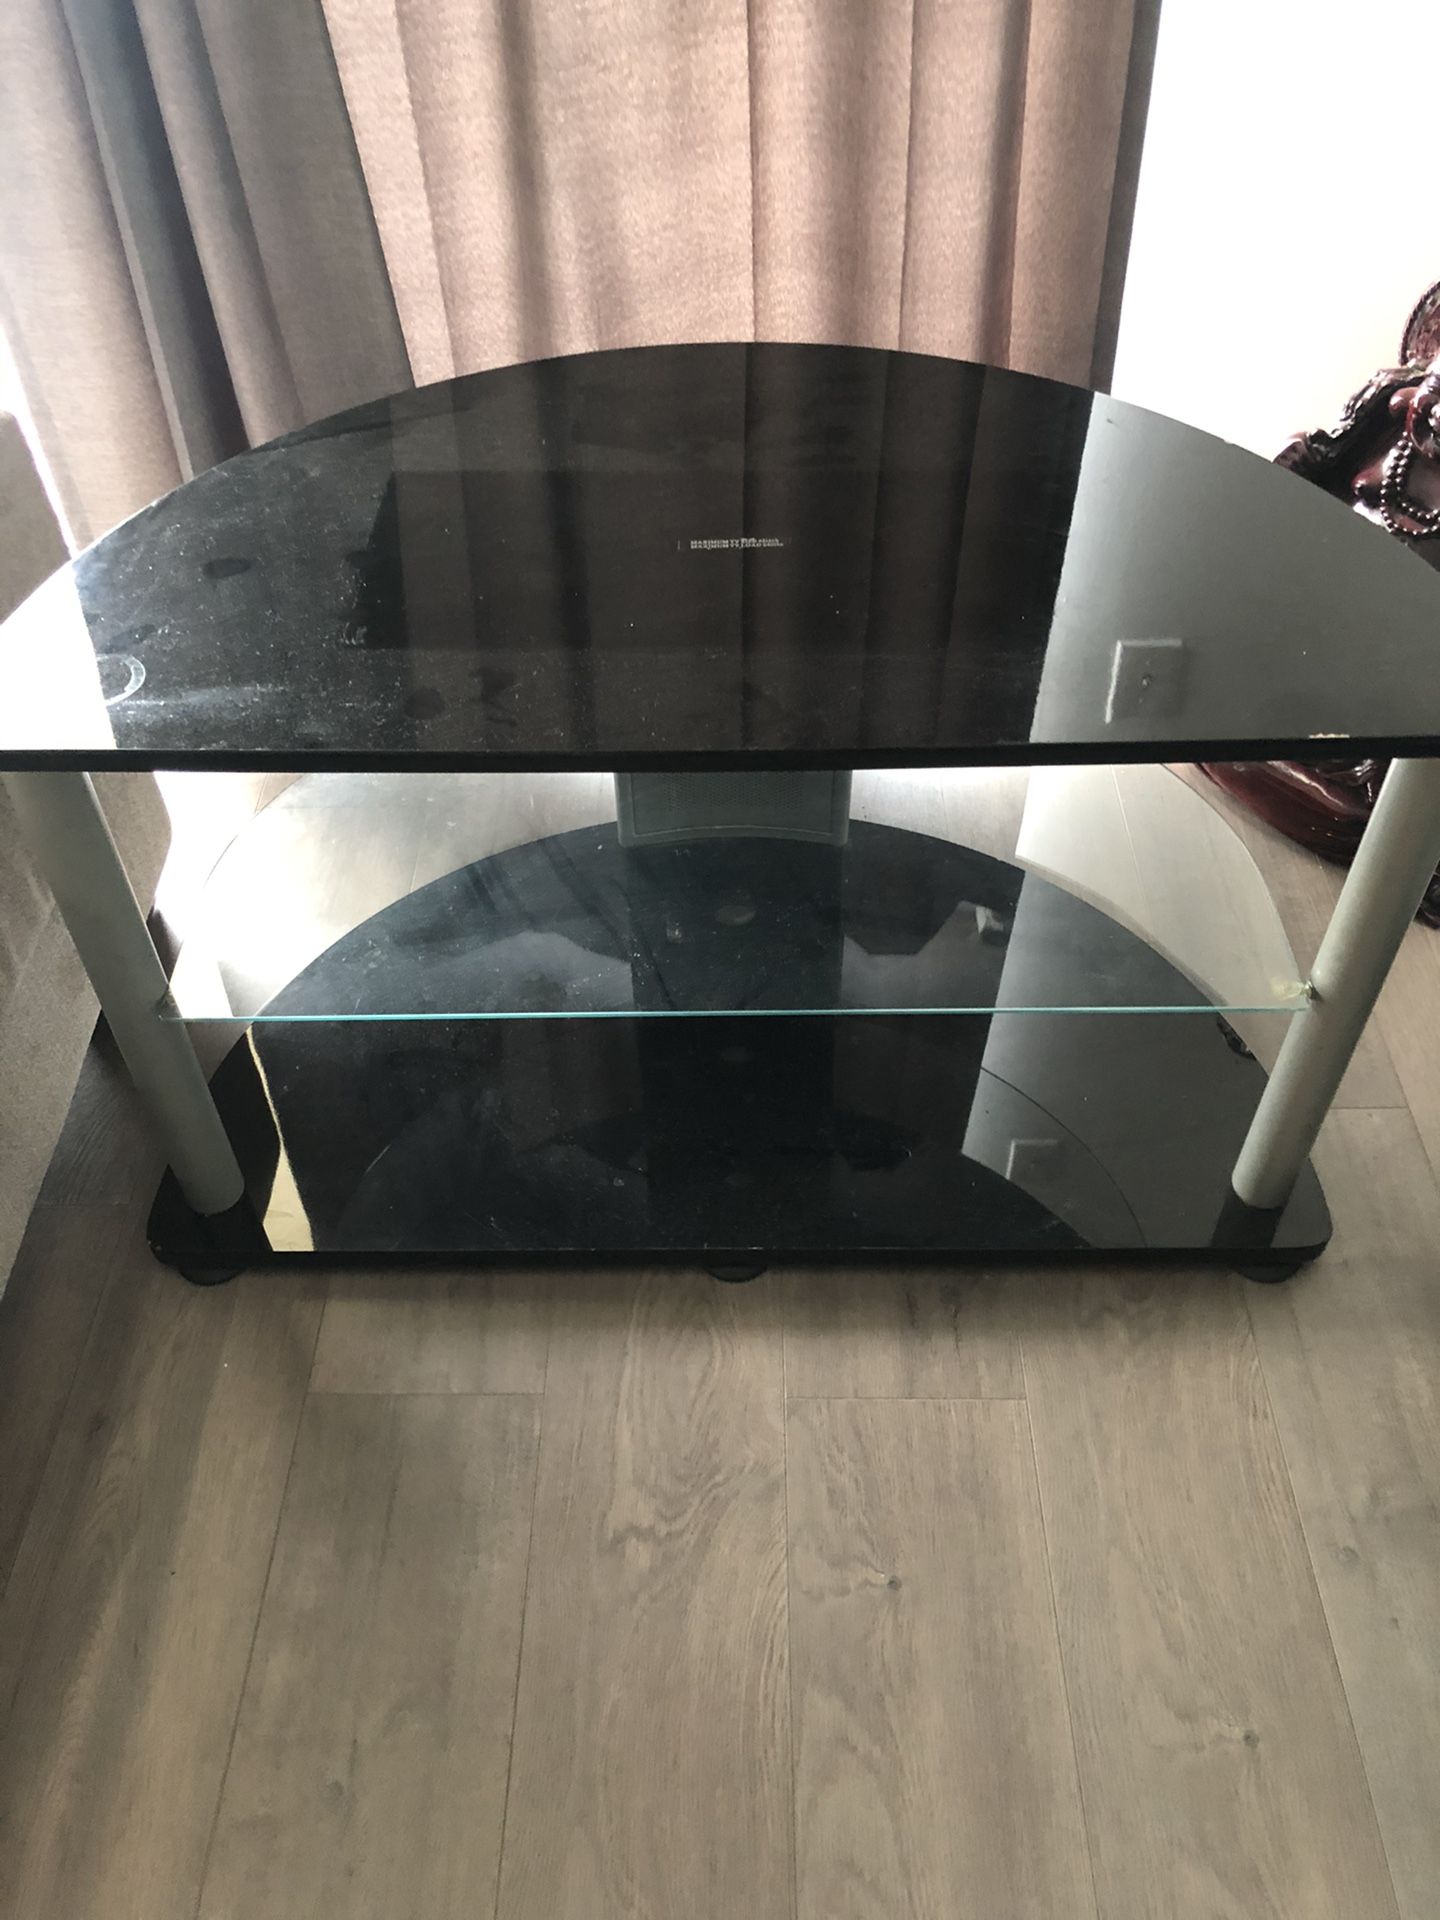 TV stand supports 50 inch beautifully